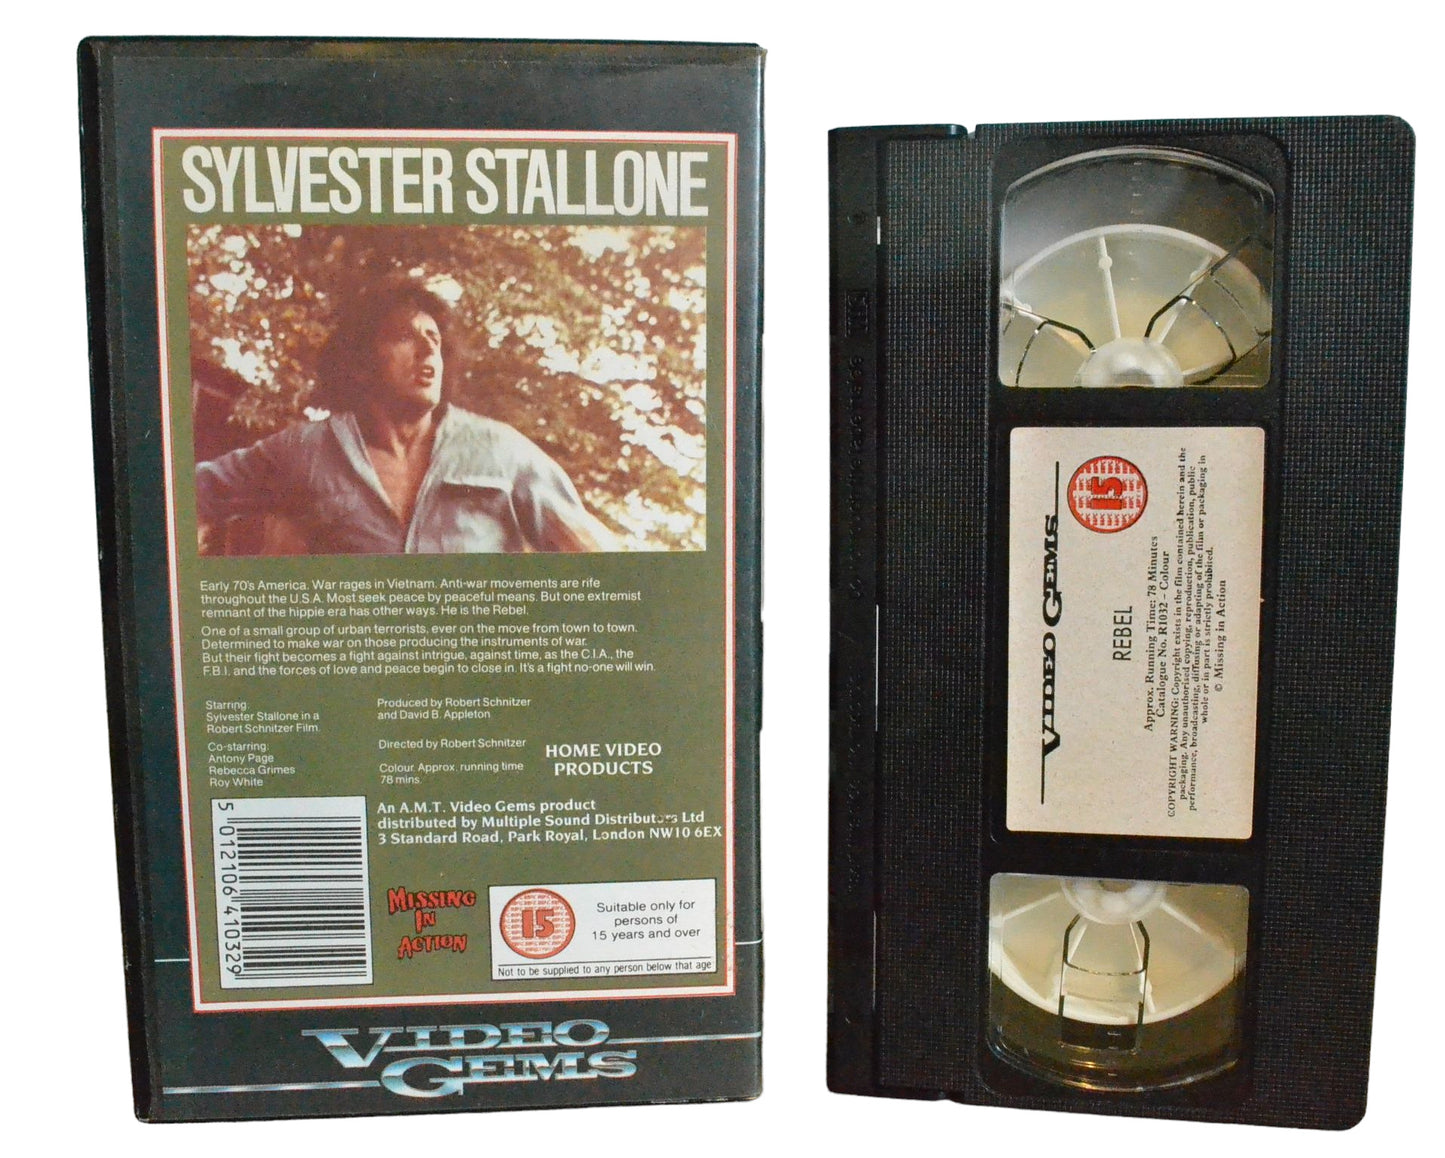 Stallone is the : Rebel - Sylvester Stallone - Video Gems - R1032 - Drama - Pal - VHS-